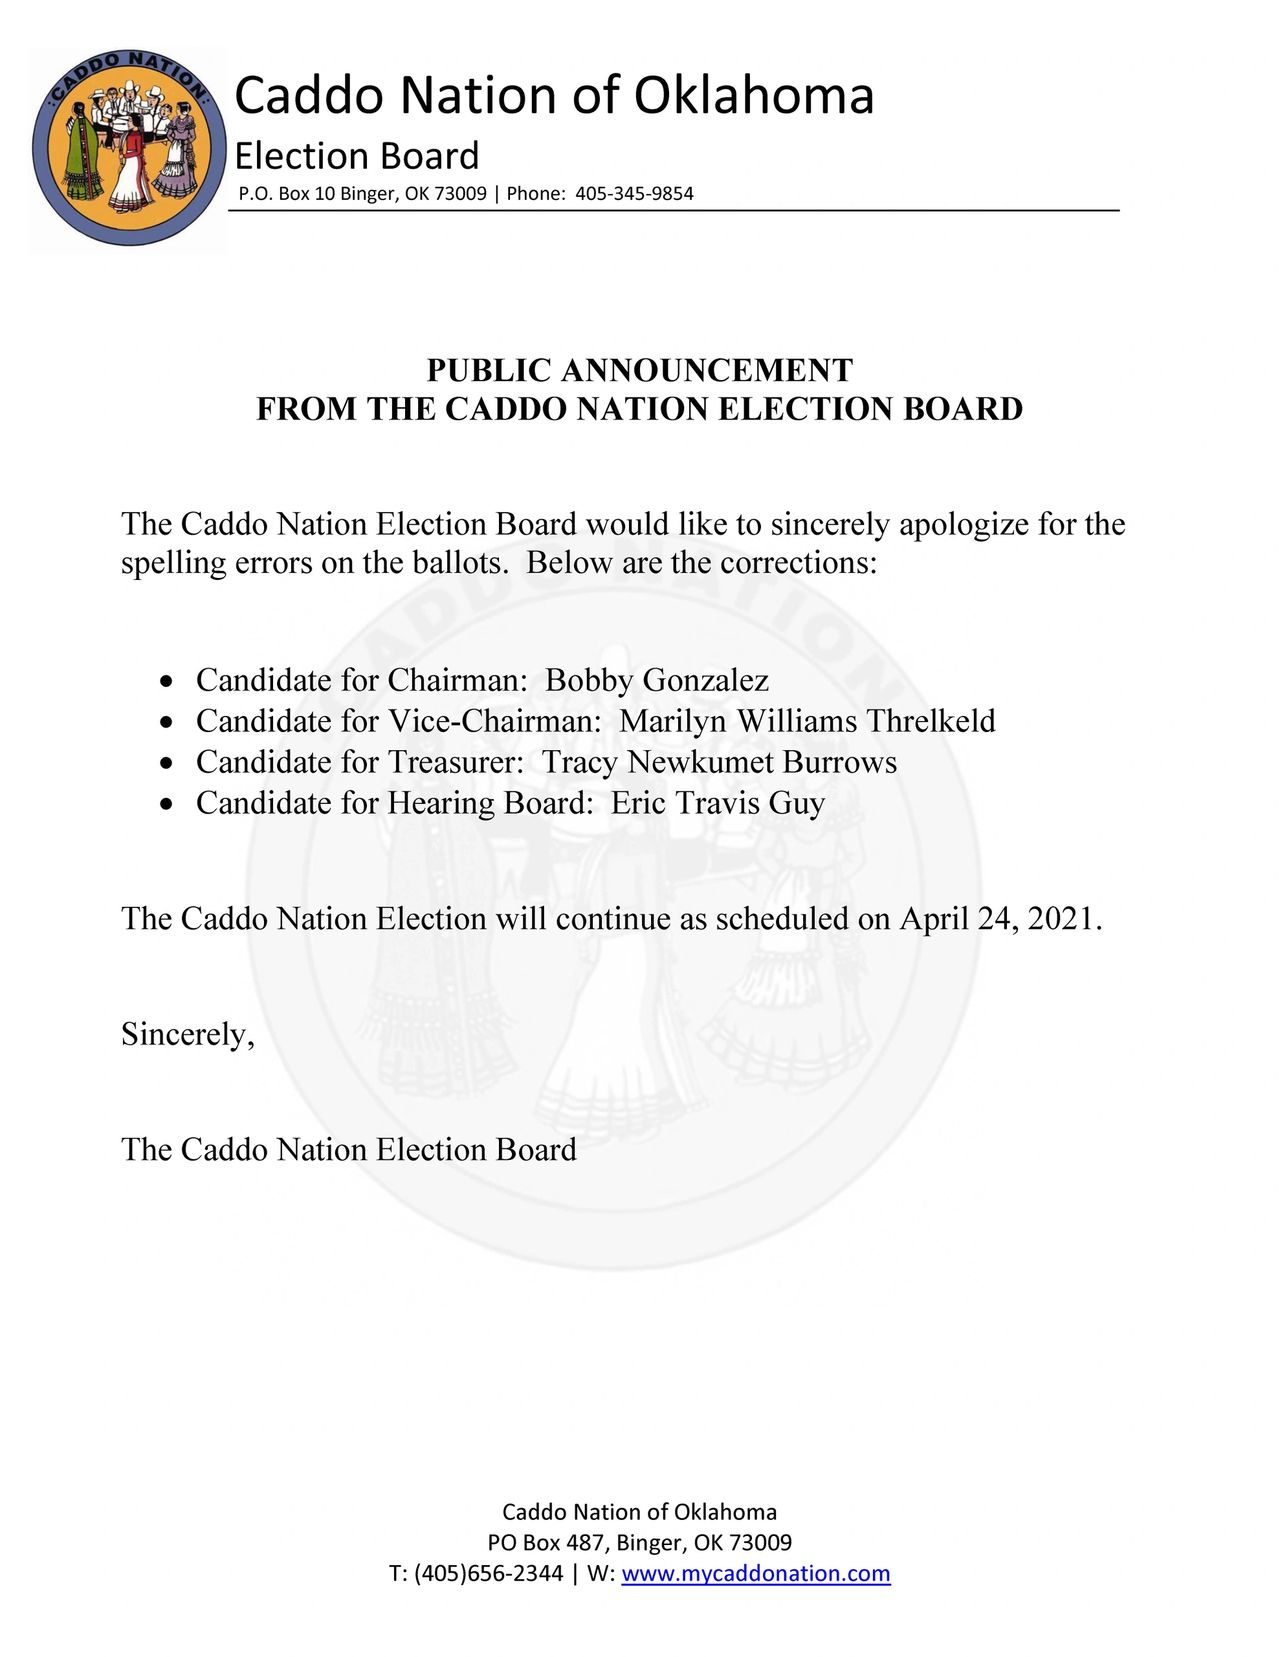 Public Announcement From The Caddo Nation Election Board